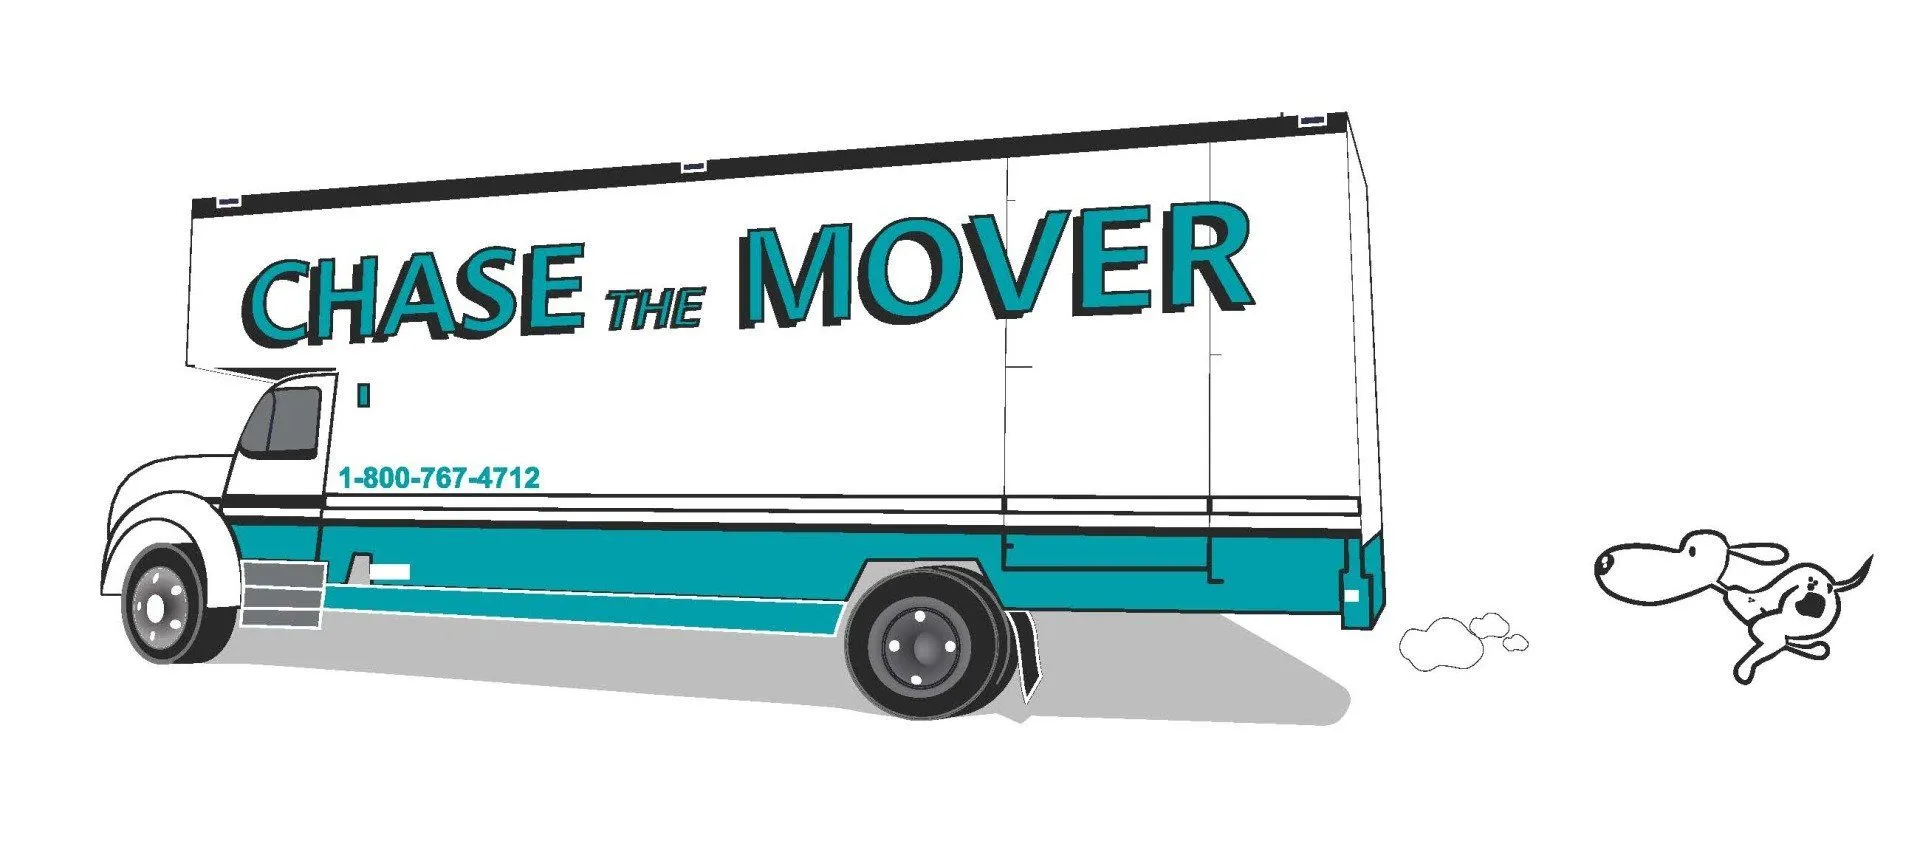 Chase the Mover logo